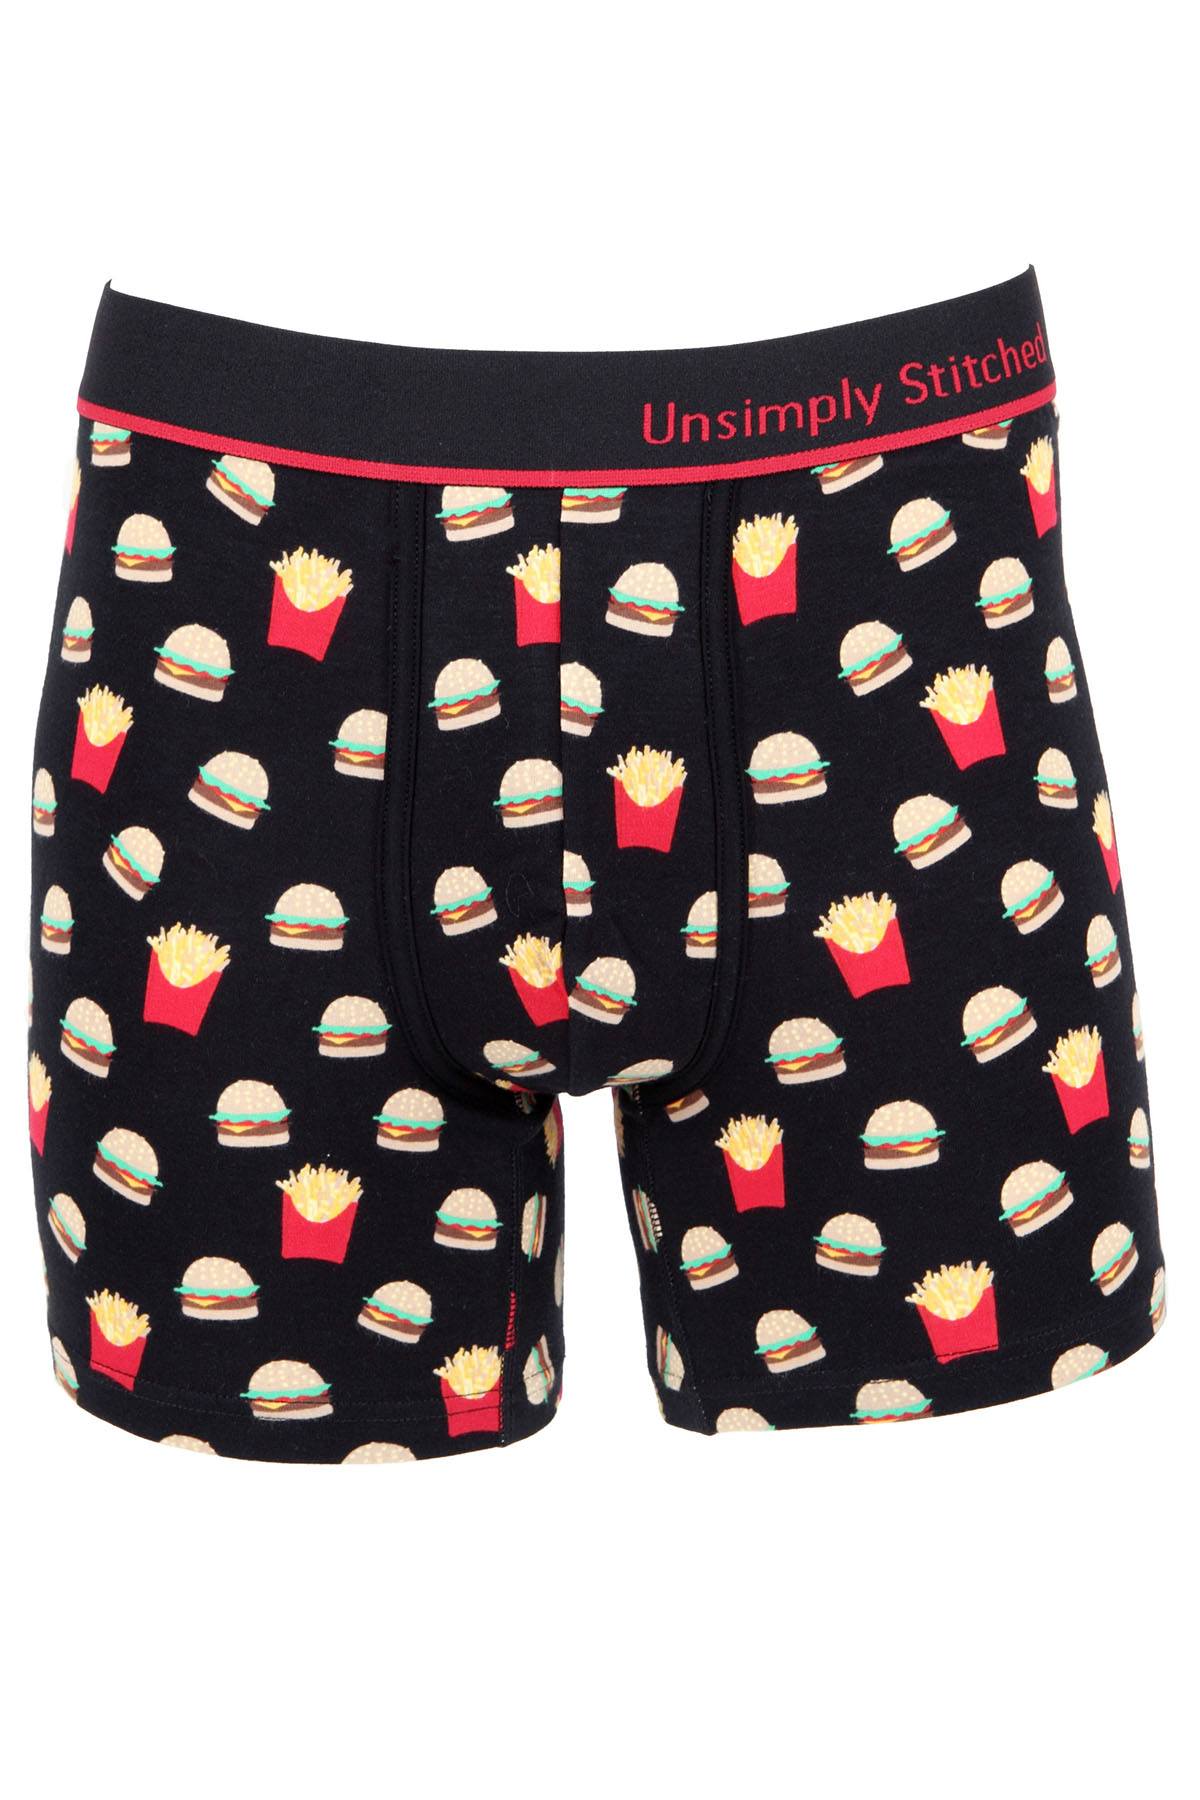 Unsimply Stitched Black Cheeseburger & Fries Boxer Brief